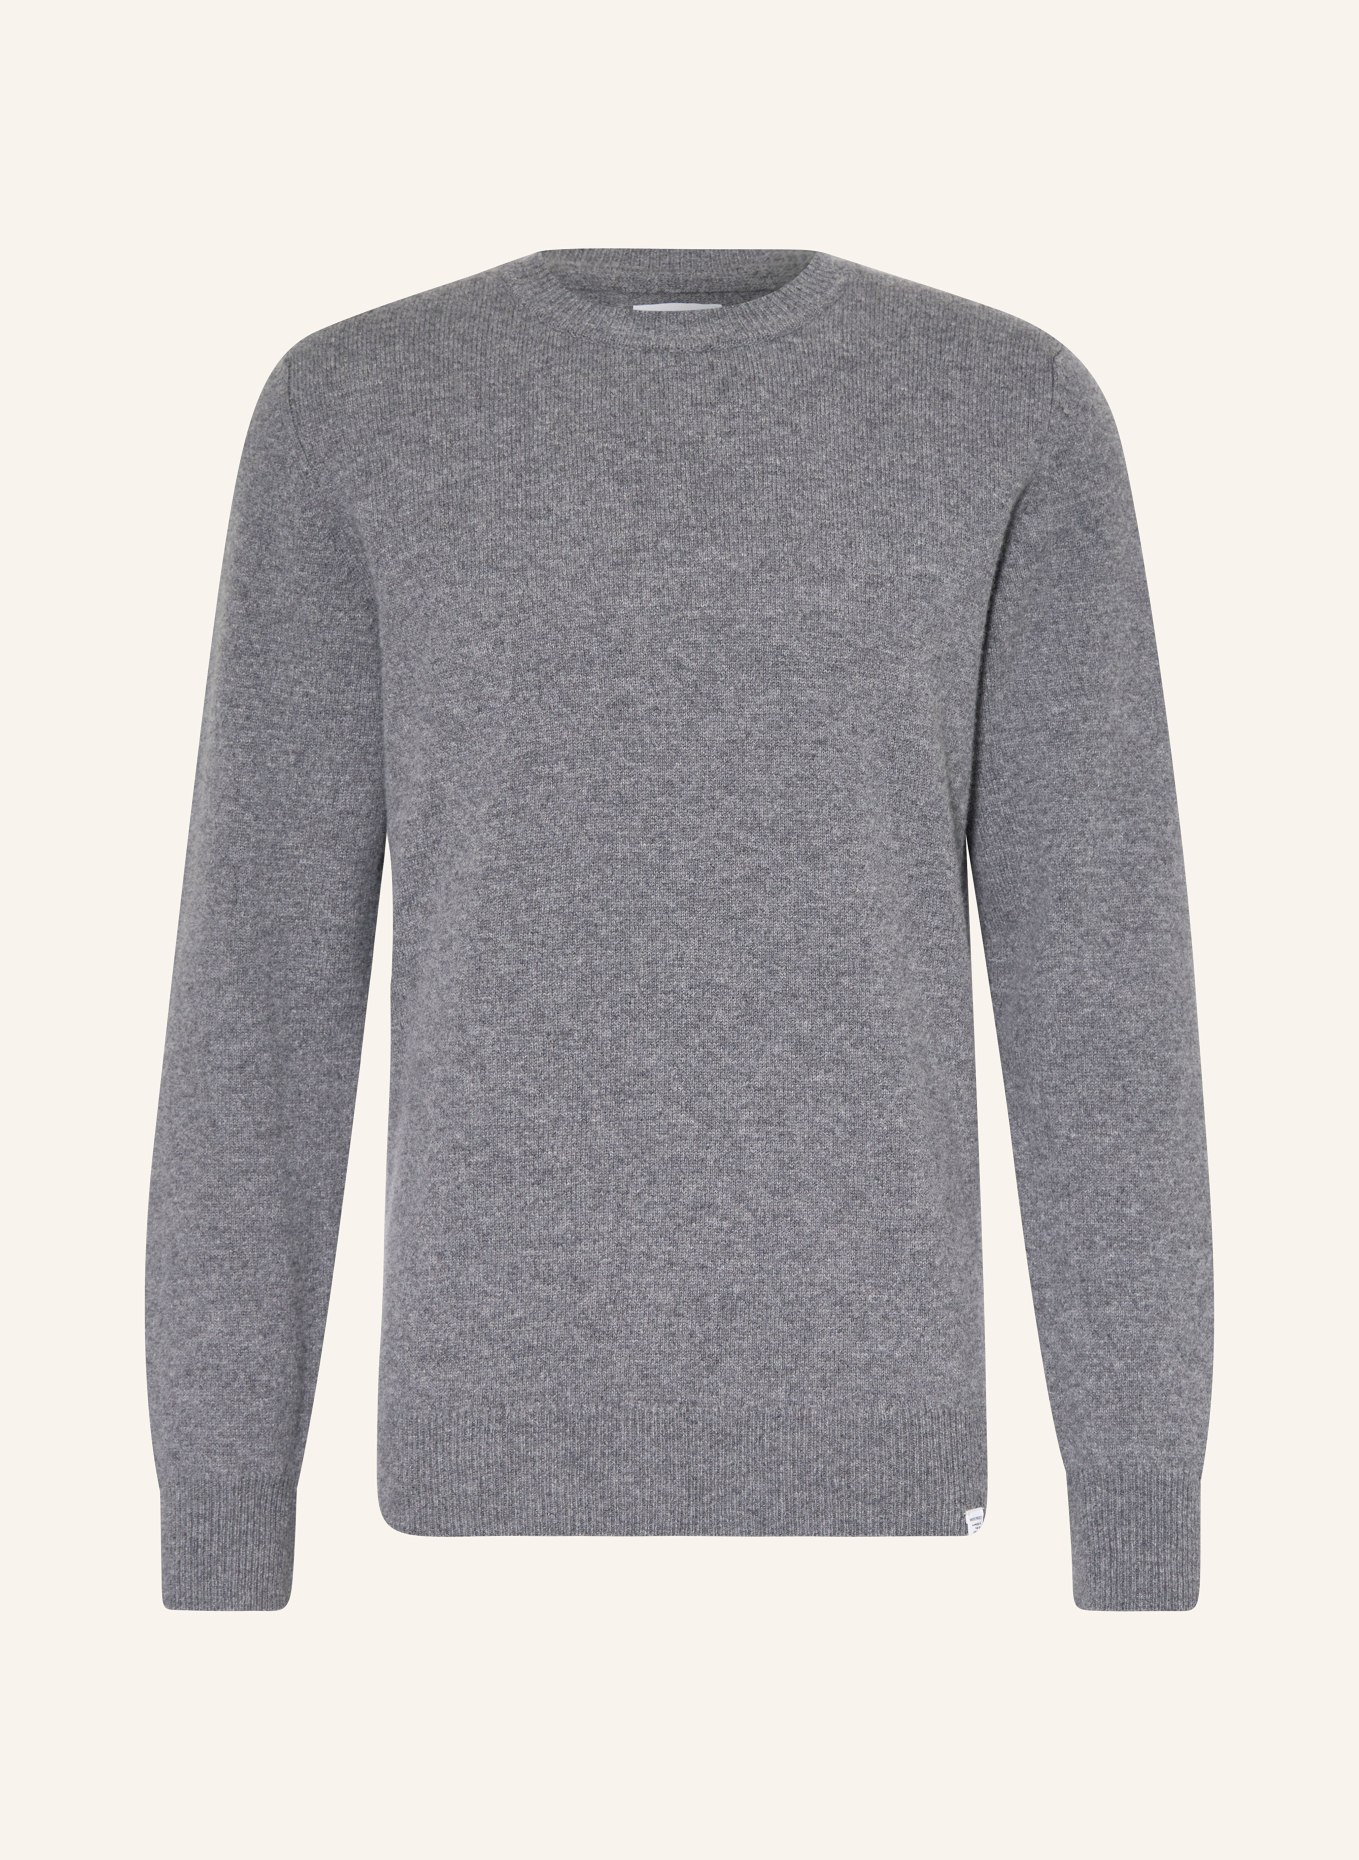 NORSE PROJECTS Sweater SIGFRIED made of merino wool, Color: GRAY (Image 1)